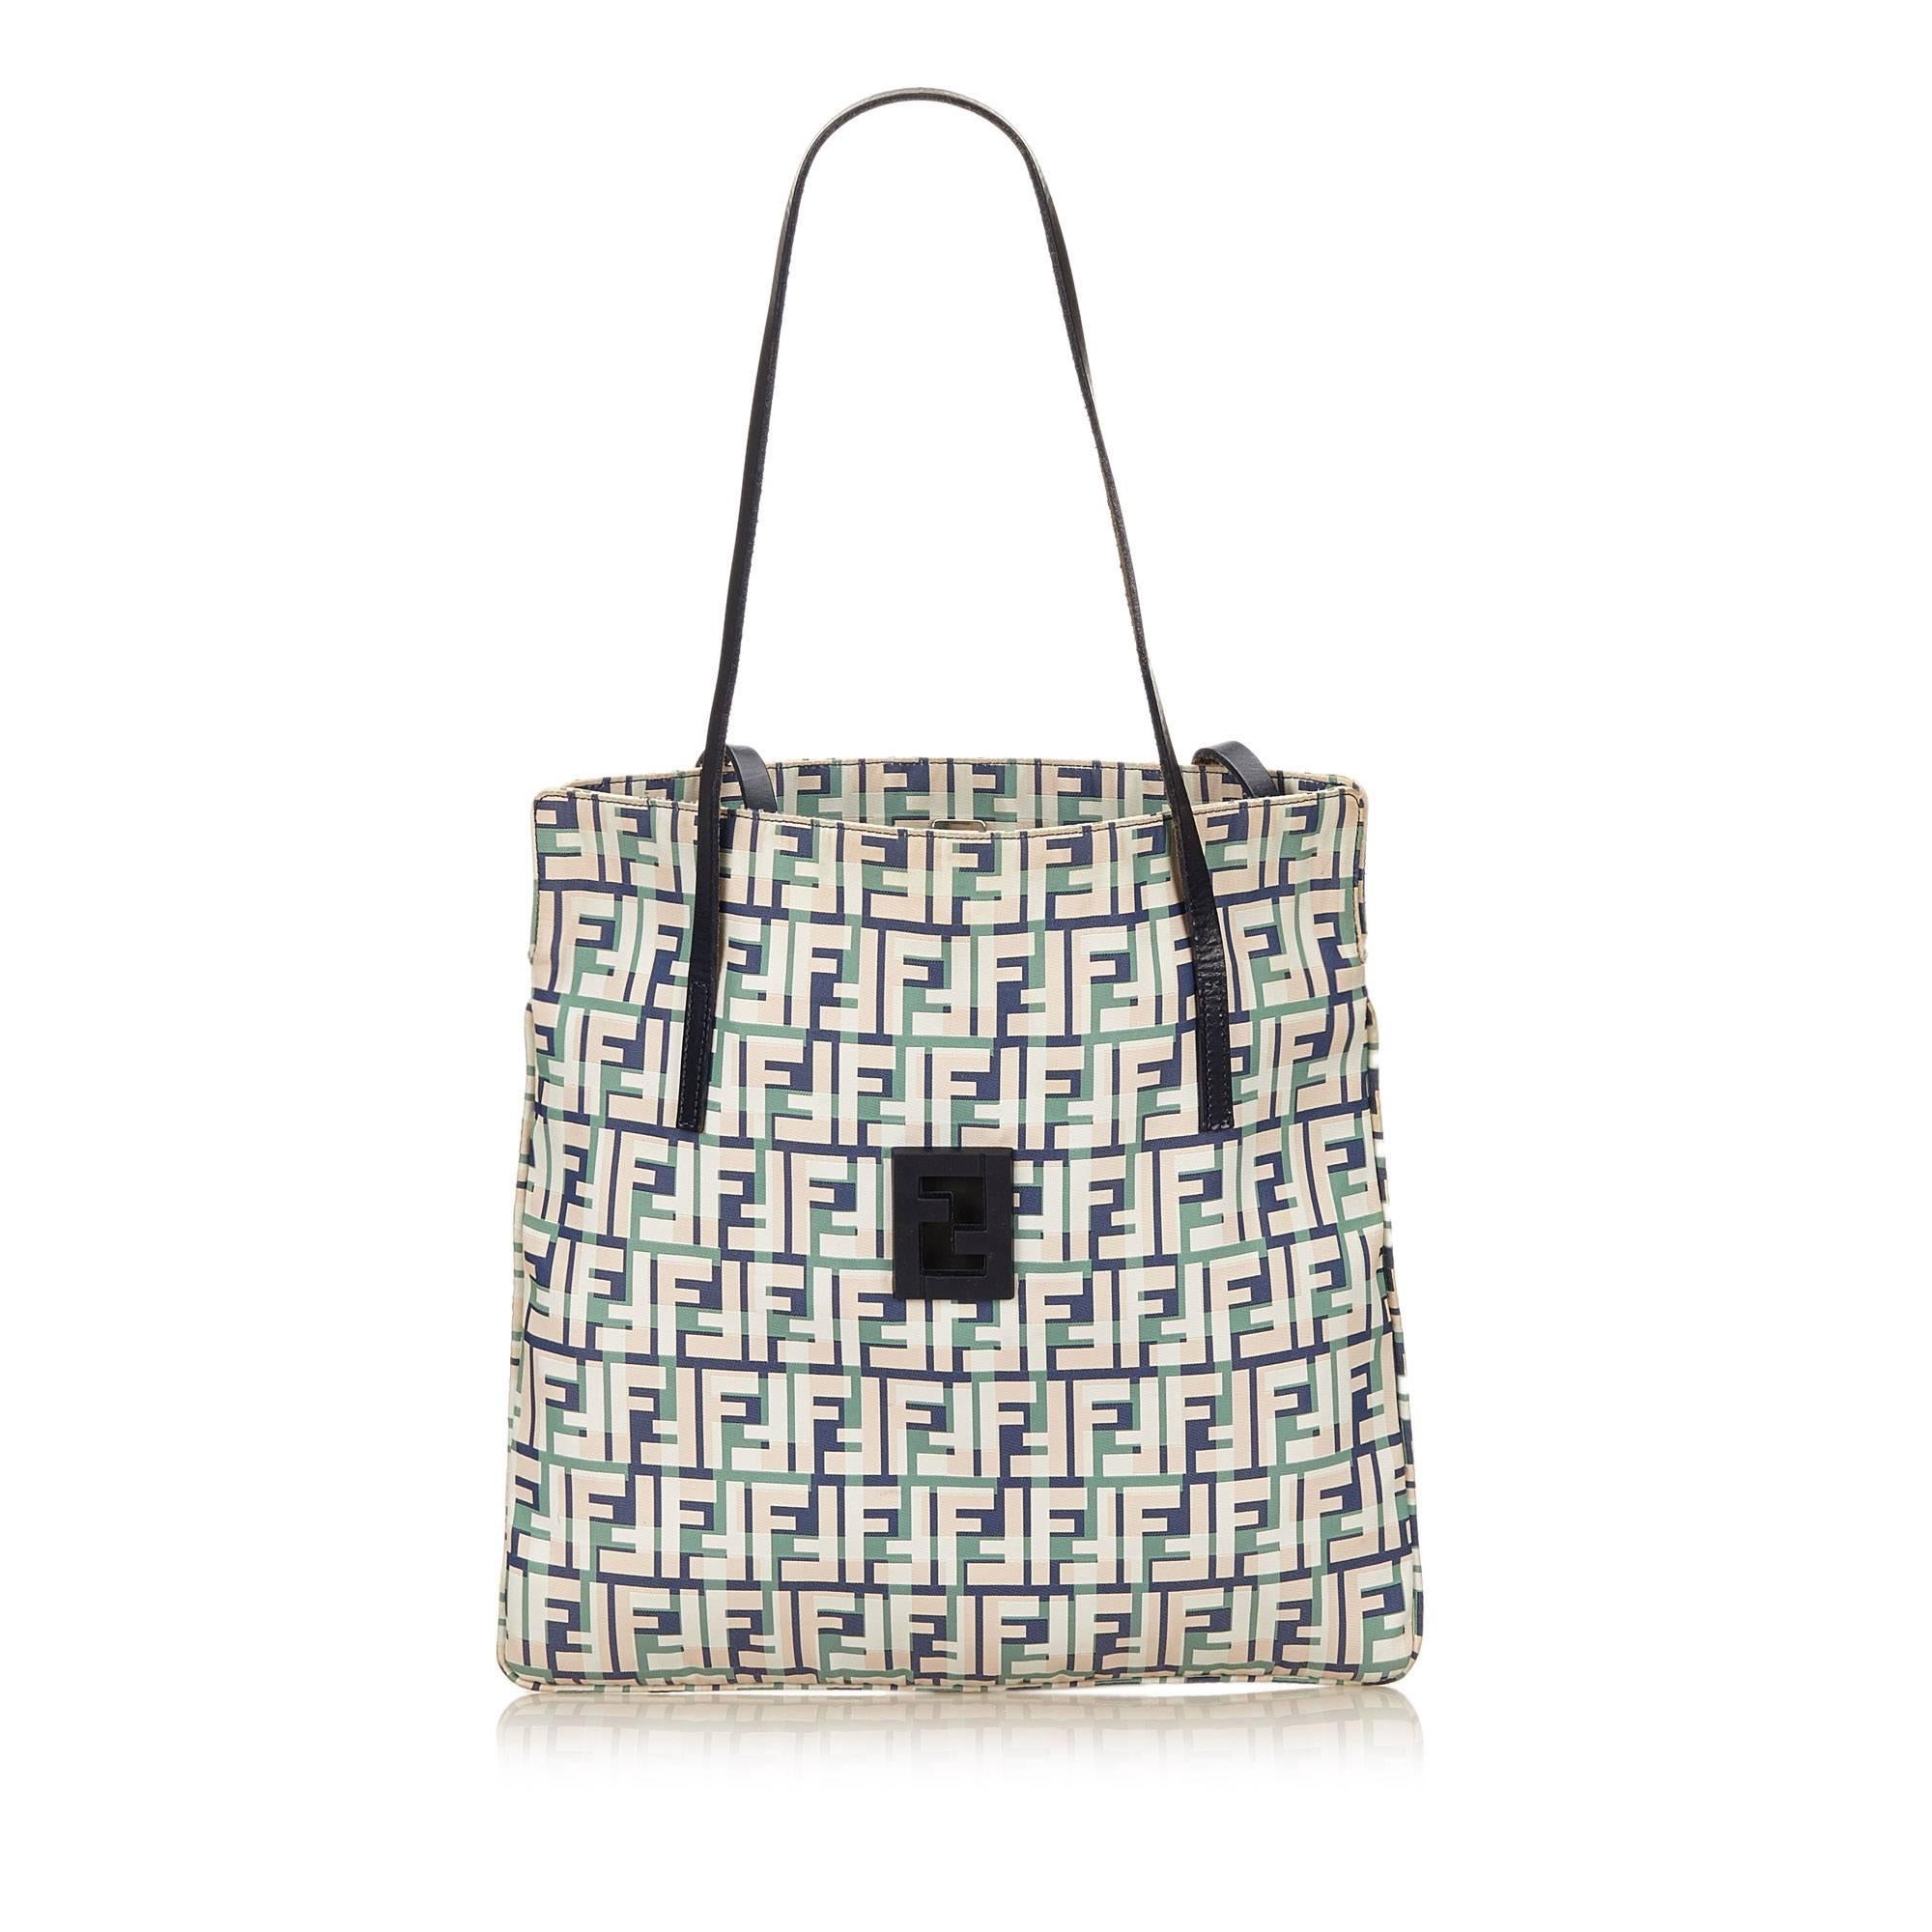 Product details:  Multicolor Zucca-printed canvas tote bag by Fendi.  Dual leather shoulder straps.  Open top.  Lined interior with inner zip pocket.  13